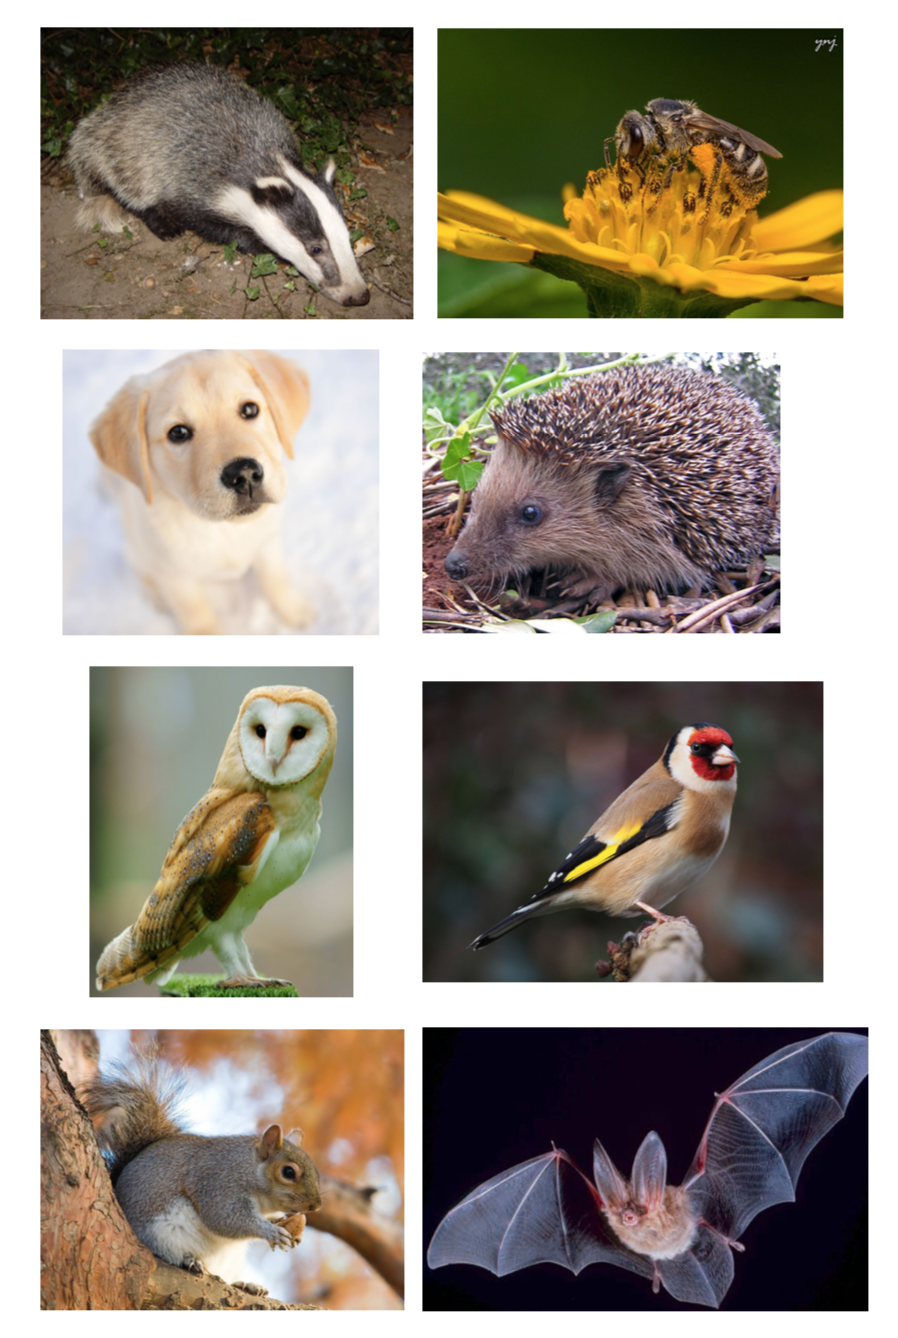 Common animals. Day and Night animals. Day time animals. Common animal